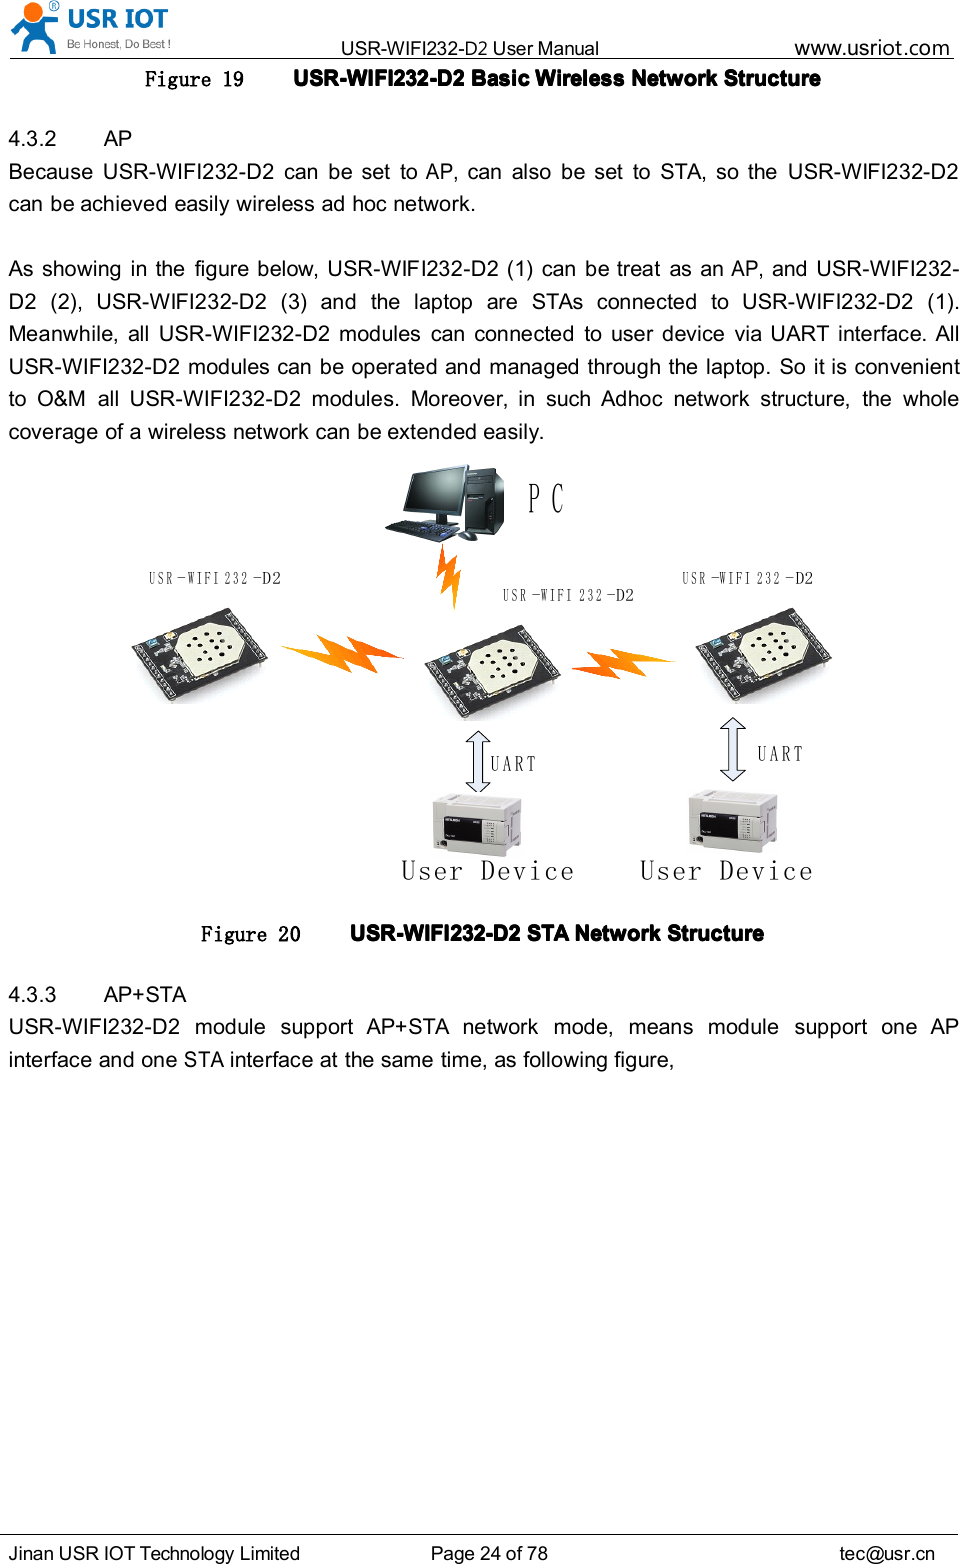 USR-WIFI232- D2 User Manual www.usr iot .comJinan USR IOT Technology Limited Page 24 of 78 tec@usr.cnFigure 19 USR-WIFI232-D2USR-WIFI232-D2USR-WIFI232-D2USR-WIFI232-D2 BasicBasicBasicBasic WirelessWirelessWirelessWireless NetworkNetworkNetworkNetwork StructureStructureStructureStructure4.3.2 APBecause USR-WIFI232-D2 can be set toAP,can also be set to STA, so the USR-WIFI232-D2can be achieved easily wireless ad hoc network.As showing in the figure below, USR-WIFI232-D2 (1) can be treat as anAP,and USR-WIFI232-D2 (2), USR-WIFI232-D2 (3) and the laptop are STAs connected to USR-WIFI232-D2 (1).Meanwhile, all USR-WIFI232-D2 modules can connected to user device via UART interface. AllUSR-WIFI232-D2 modules can be operated and managed through the laptop. So it is convenientto O&amp;M all USR-WIFI232-D2 modules. Moreover, in such Adhoc network structure, the wholecoverage of a wireless network can be extended easily.PCUSR-WIFI232- D 2User DeviceUARTUSR-WIFI232-D2USR-WIFI232- D 2UARTUser DeviceFigure 20 USR-WIFI232-D2USR-WIFI232-D2USR-WIFI232-D2USR-WIFI232-D2 STASTASTASTA NetworkNetworkNetworkNetwork StructureStructureStructureStructure4.3.3 AP+STAUSR-WIFI232-D2 module support AP+STA network mode, means module support one APinterface and oneSTAinterface at the same time, as following figure,